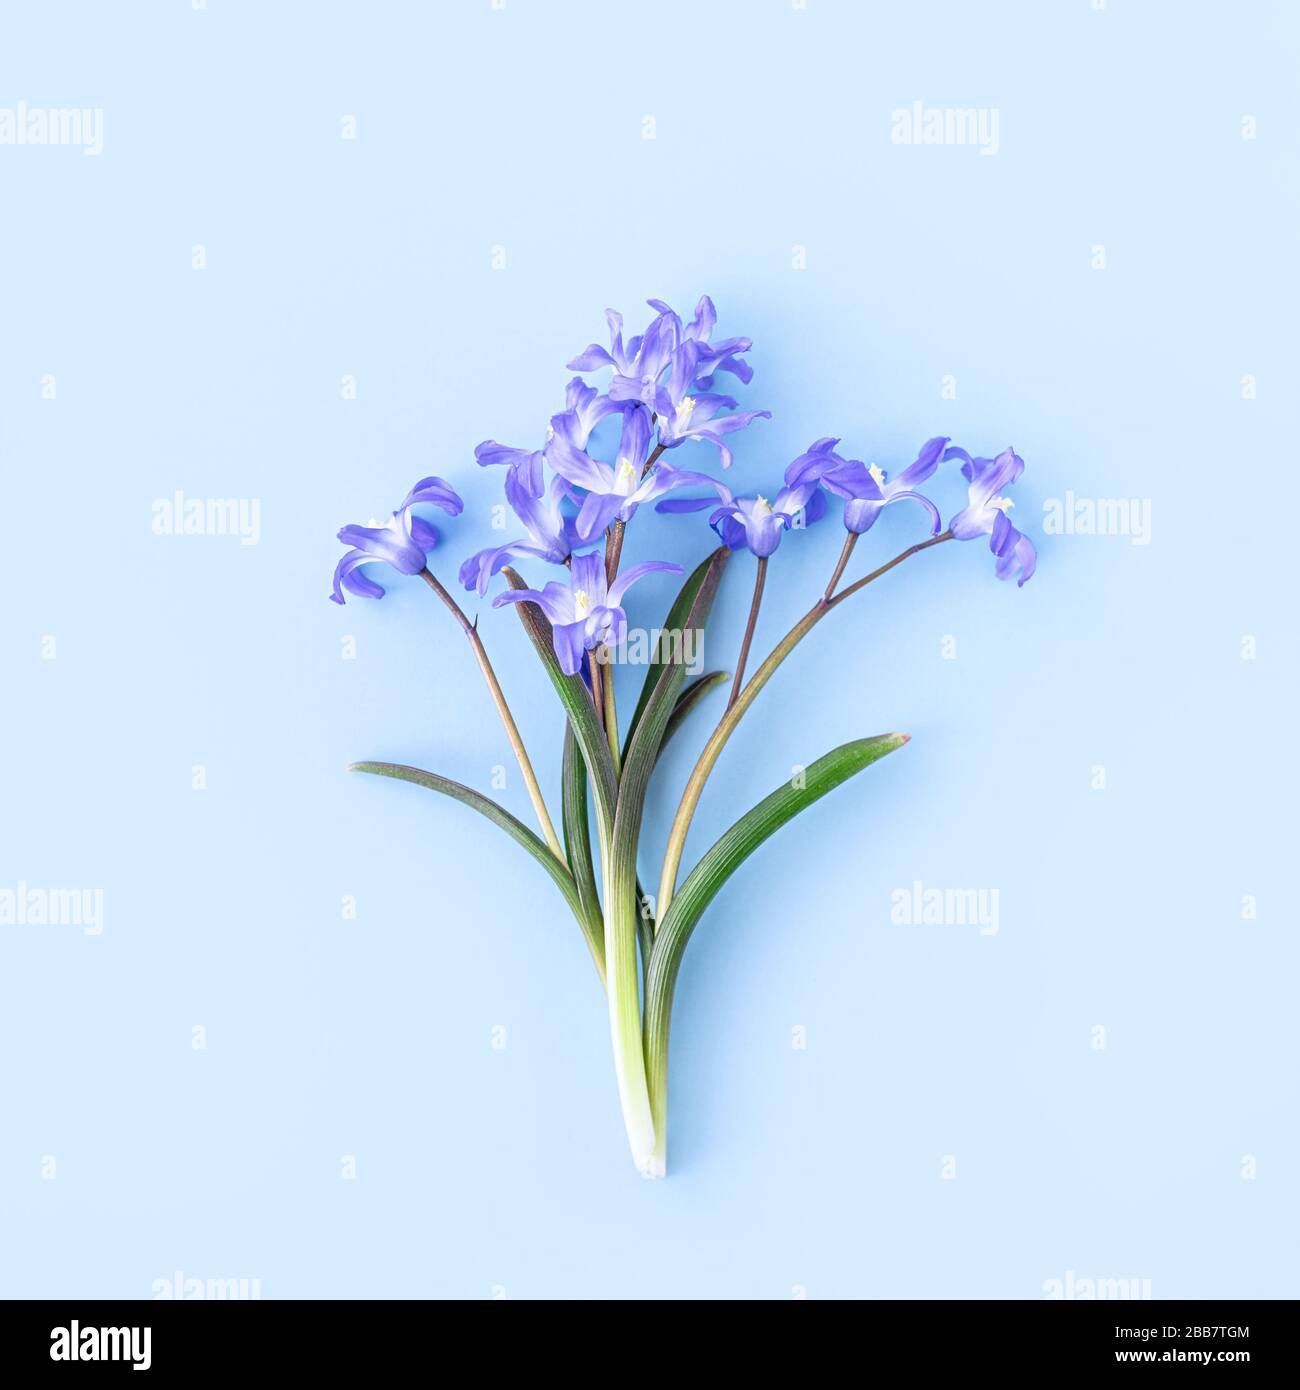 Scilla luciliae on a blue background close up. Bulbous flowering plants. Flat lay. Copy space. Stock Photo